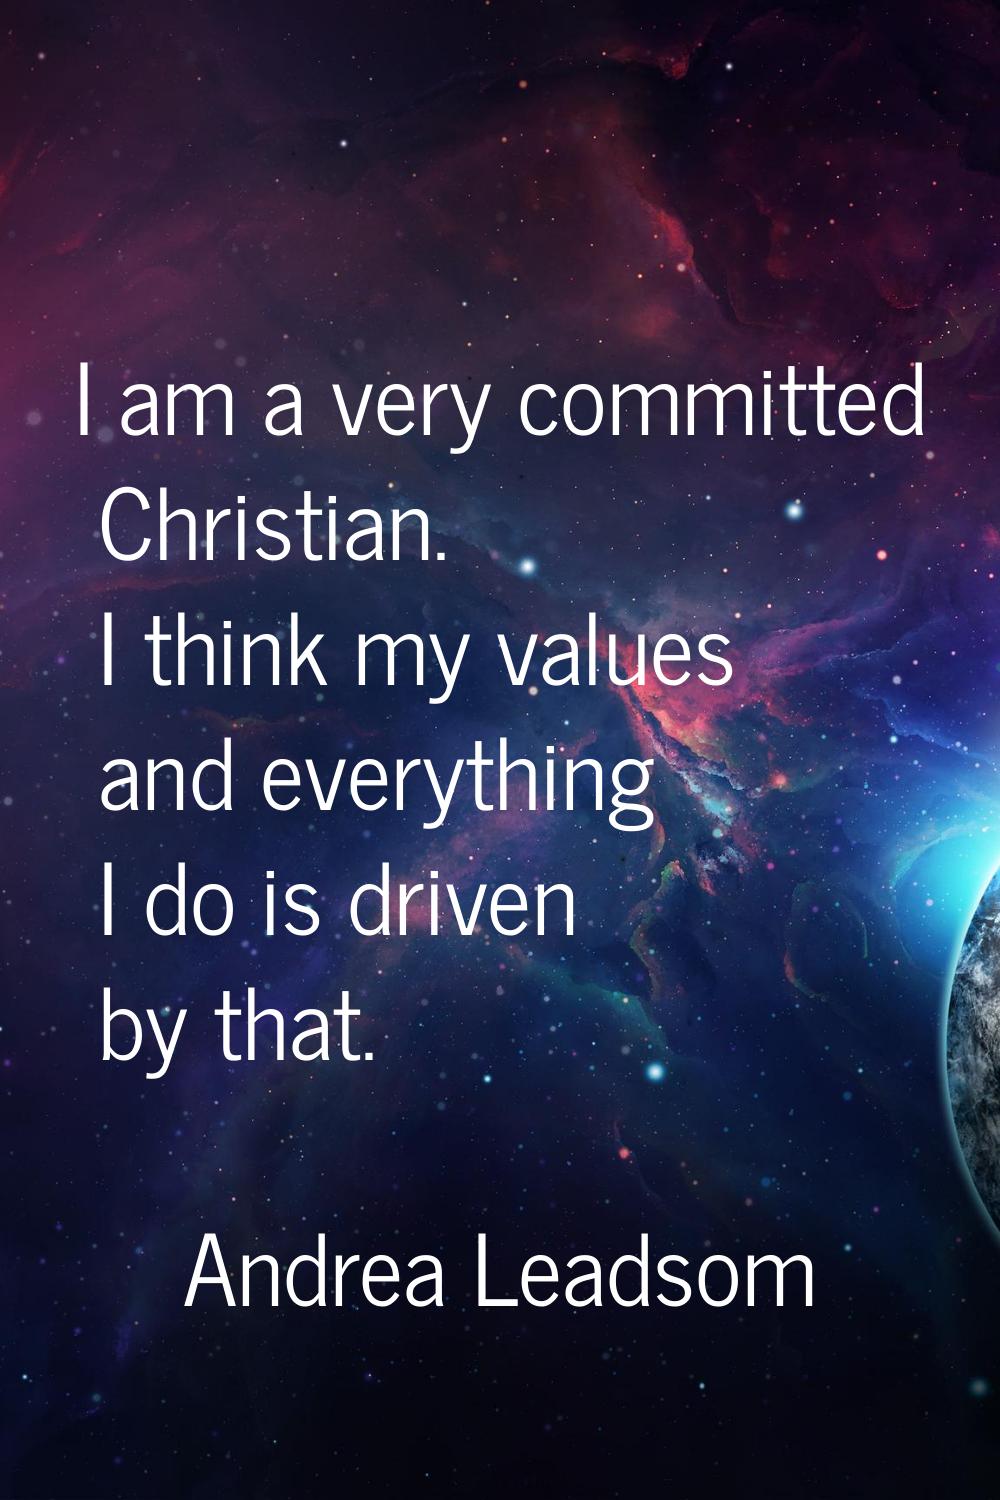 I am a very committed Christian. I think my values and everything I do is driven by that.